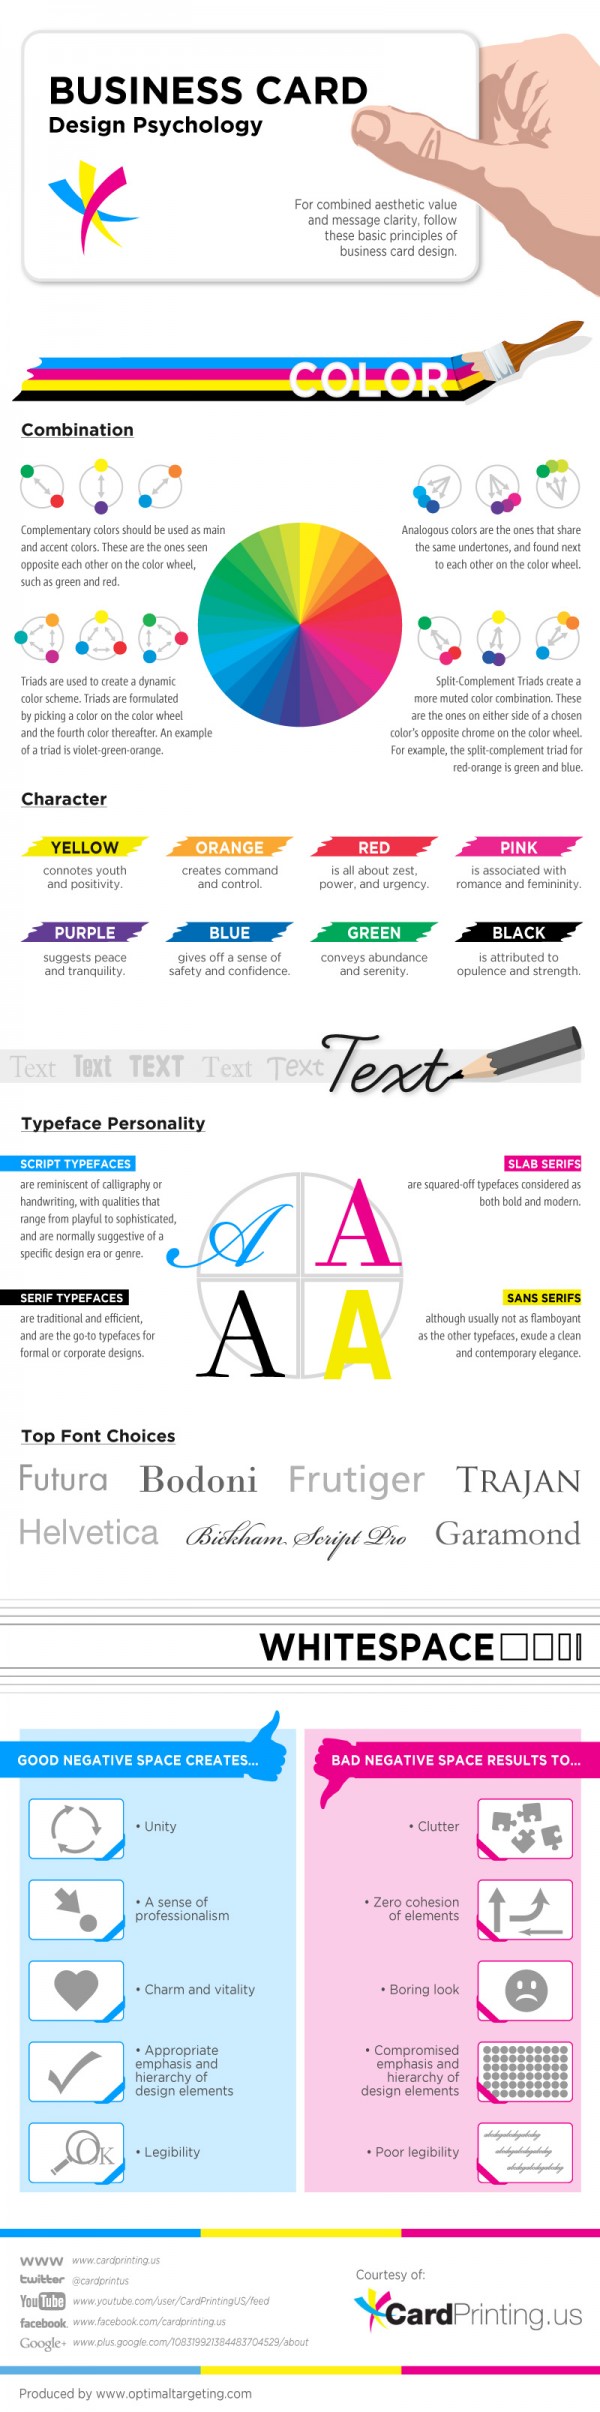 Business Card Design Psychology infographic